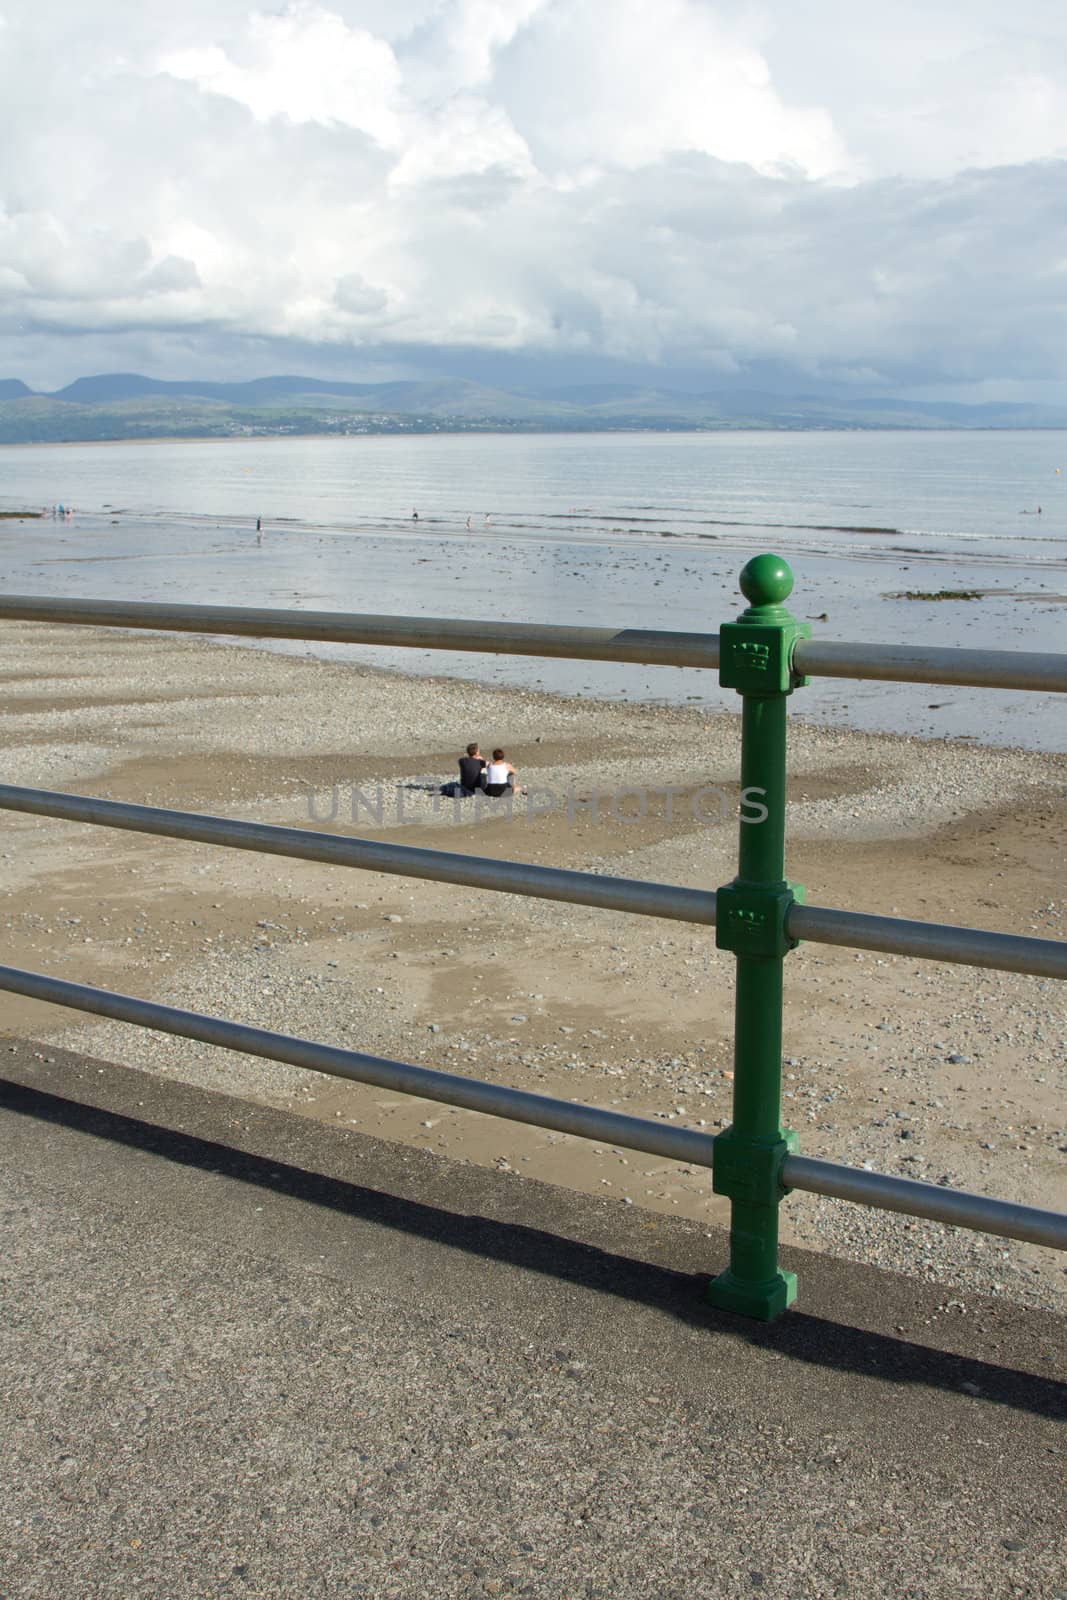 A set of railings over a sand and pebble beach with a couple sitting looking at clouds over the mountains in the distance.